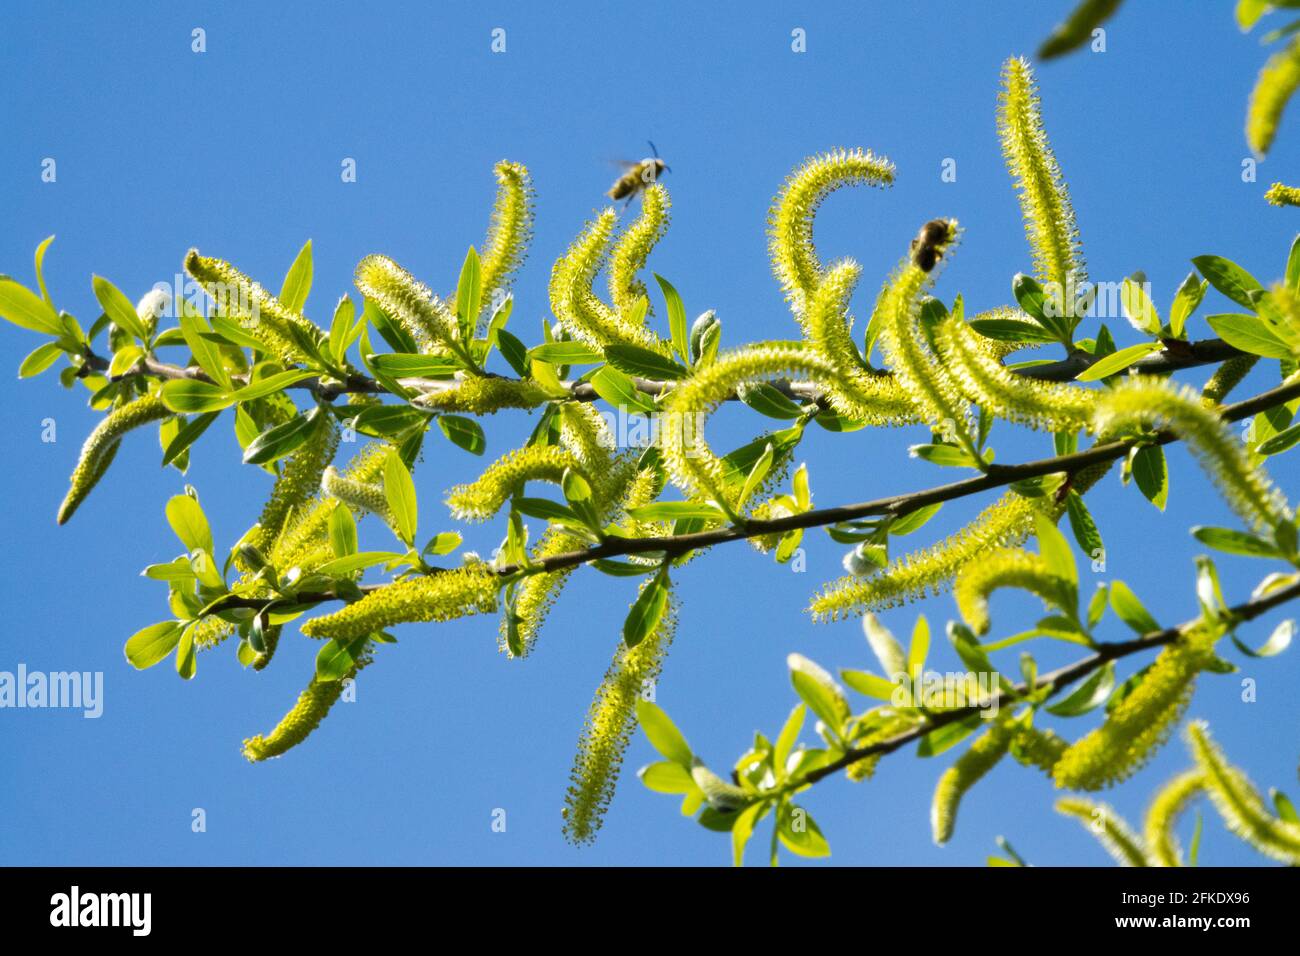 Salix fragilis Willow Catkins Spring Pollen Willow Branches Crack Willow fragile Willow Aments Against Blue Sky Salix Flowering Springtime Bees Blooms Foto Stock